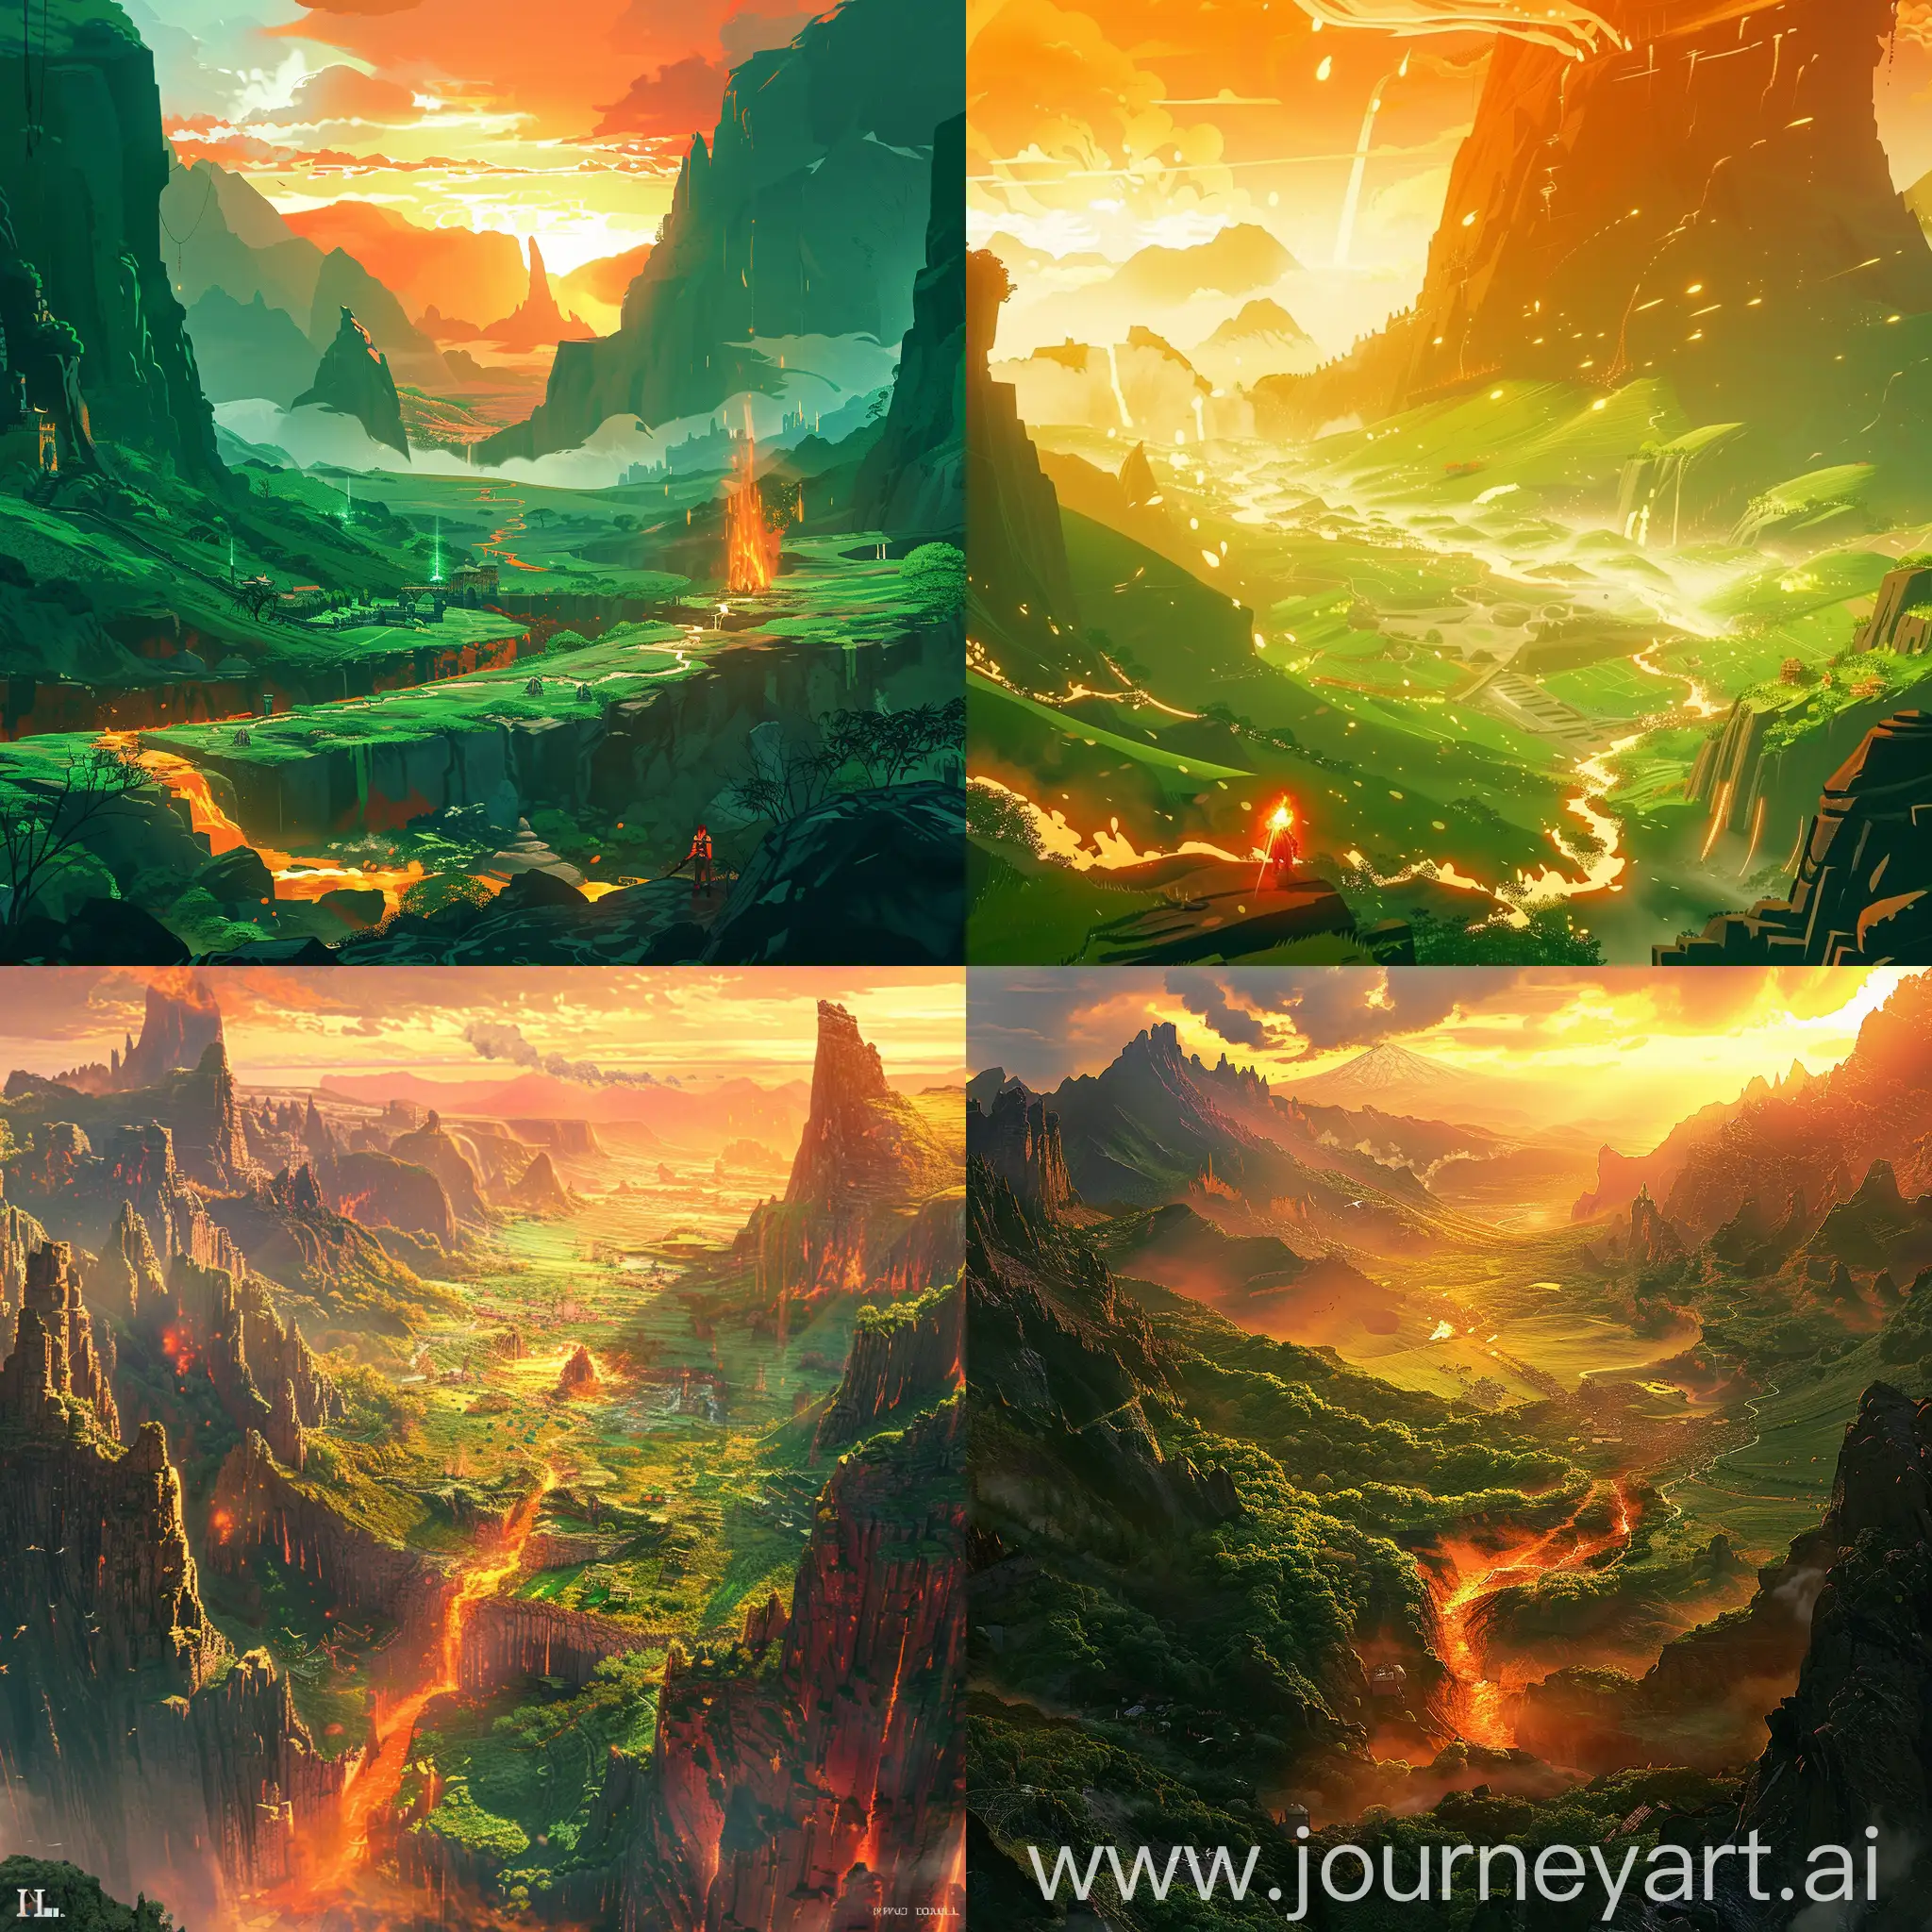 epic game visuals inspired by final fantasy. the scenario is mostly nature, with epic green great mountains and the orange light of the sunset. the main character is a fire mage. bright colors. magical place. there is a small civilization in the background. 